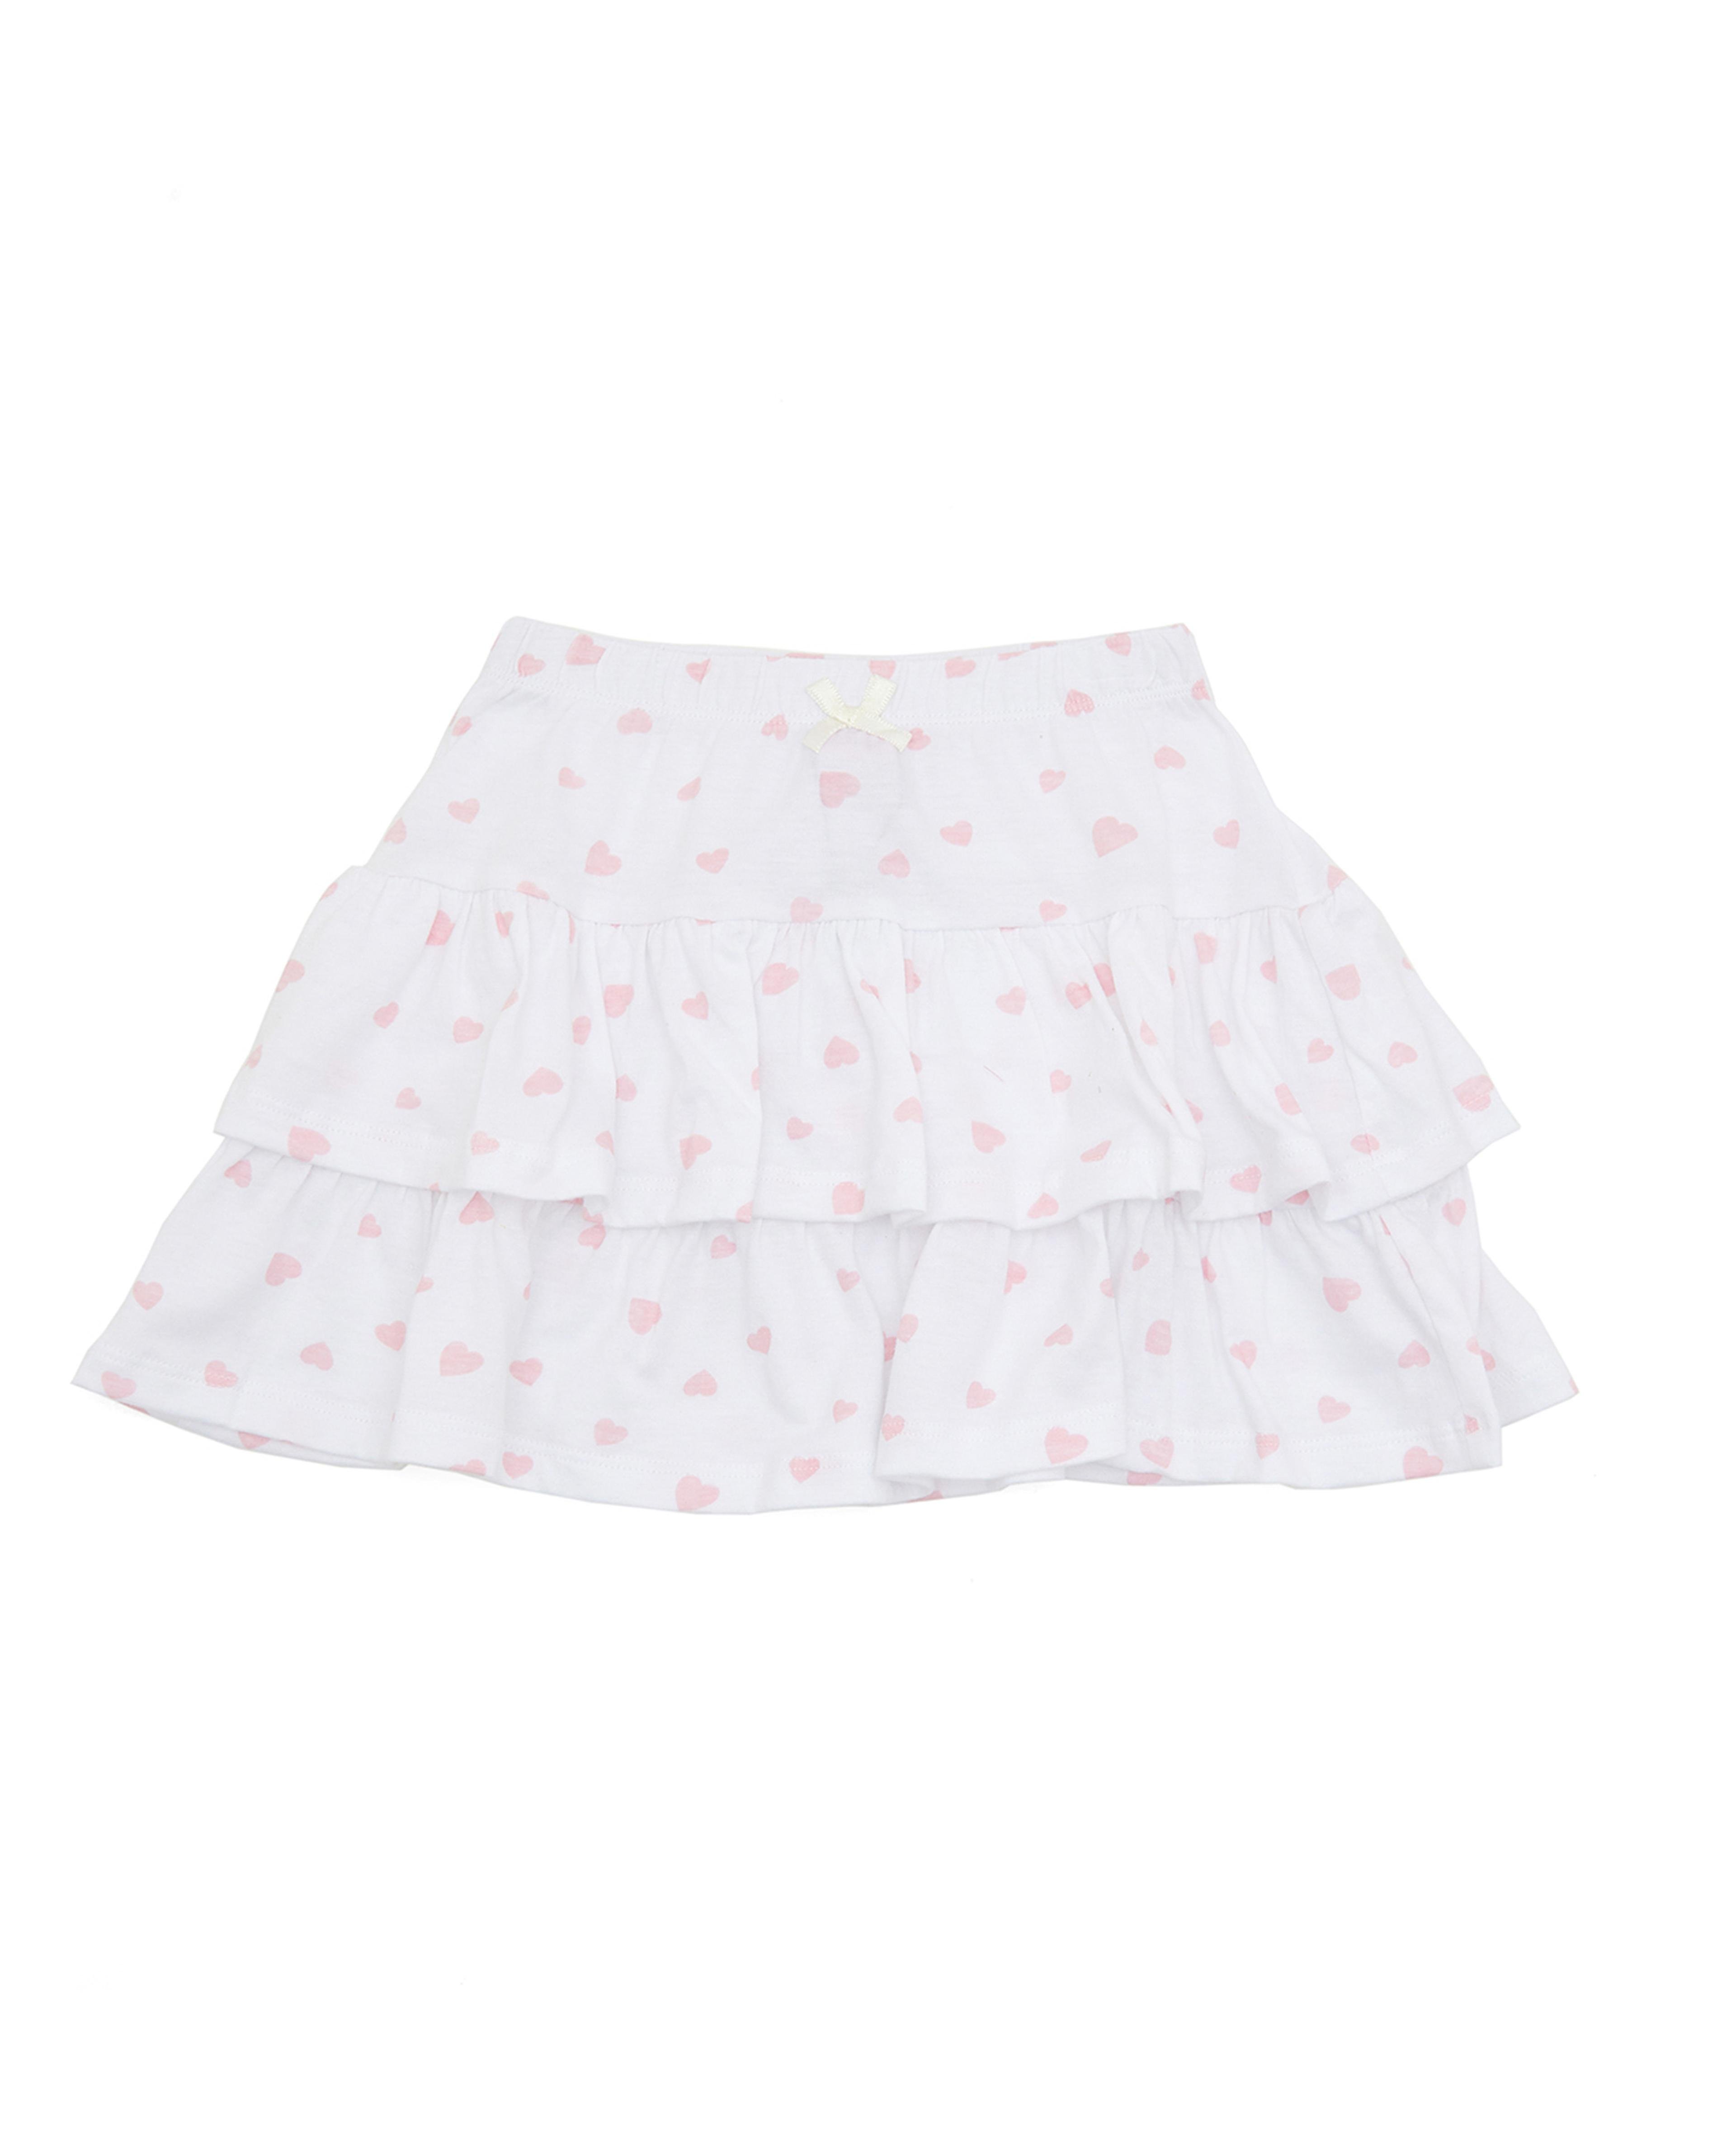 Pack of 2 Solid and Printed Mini Skirt